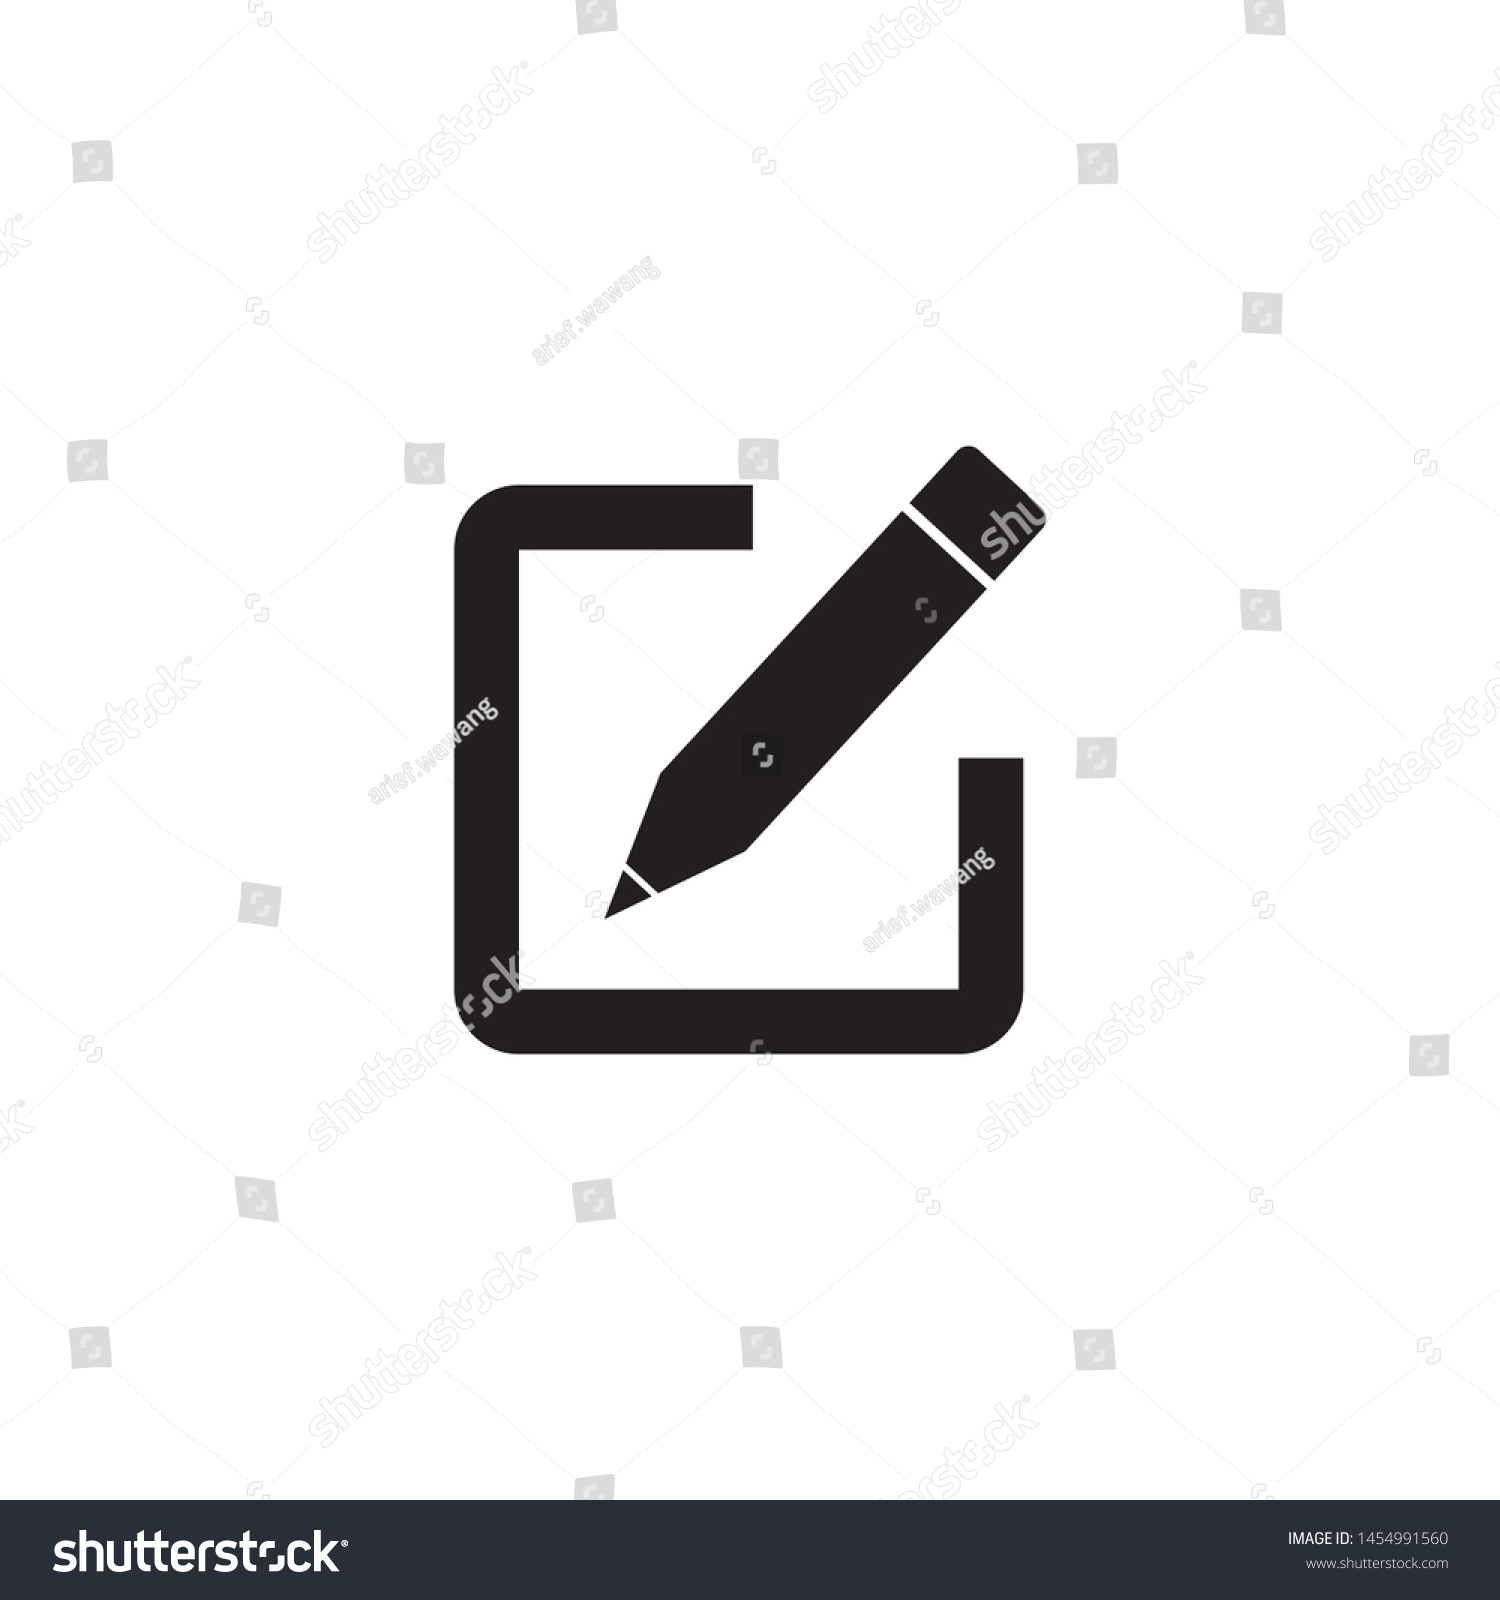 Edit icon, Pencil icon, sign up Icon vector. symbol for web site Computer and mobile vector. #1454991560